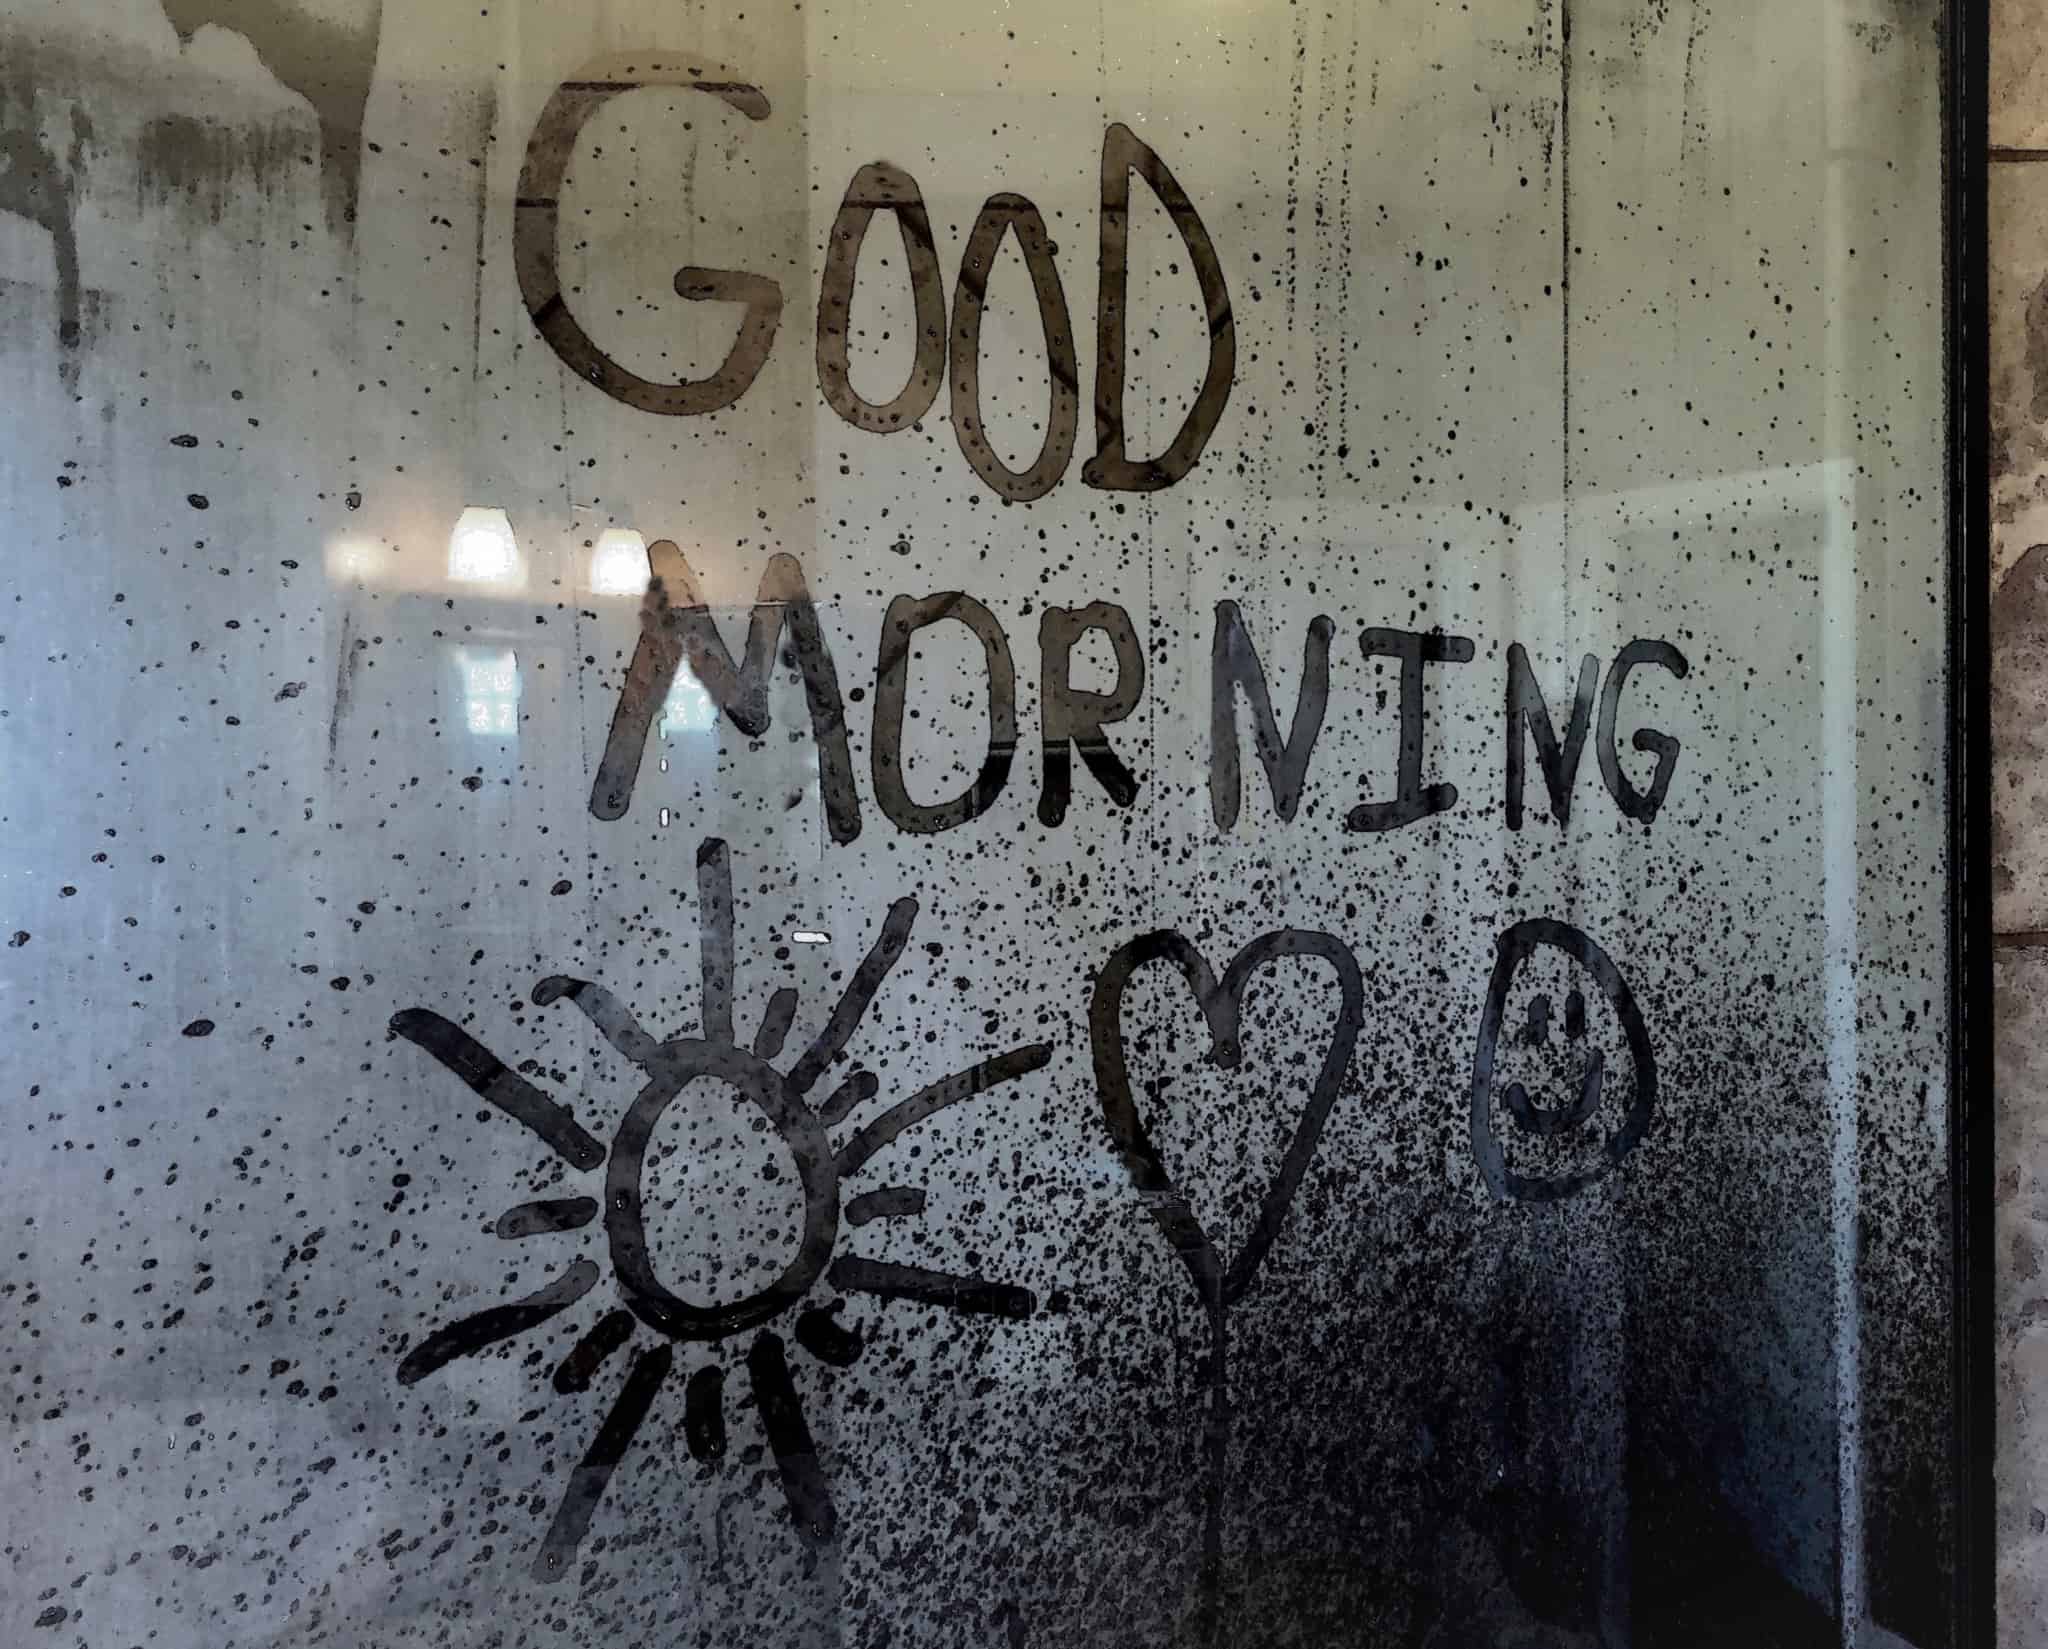 steam from hot water on the bathroom mirror on which the expression good morning and hearts and sun was written by hand and in English